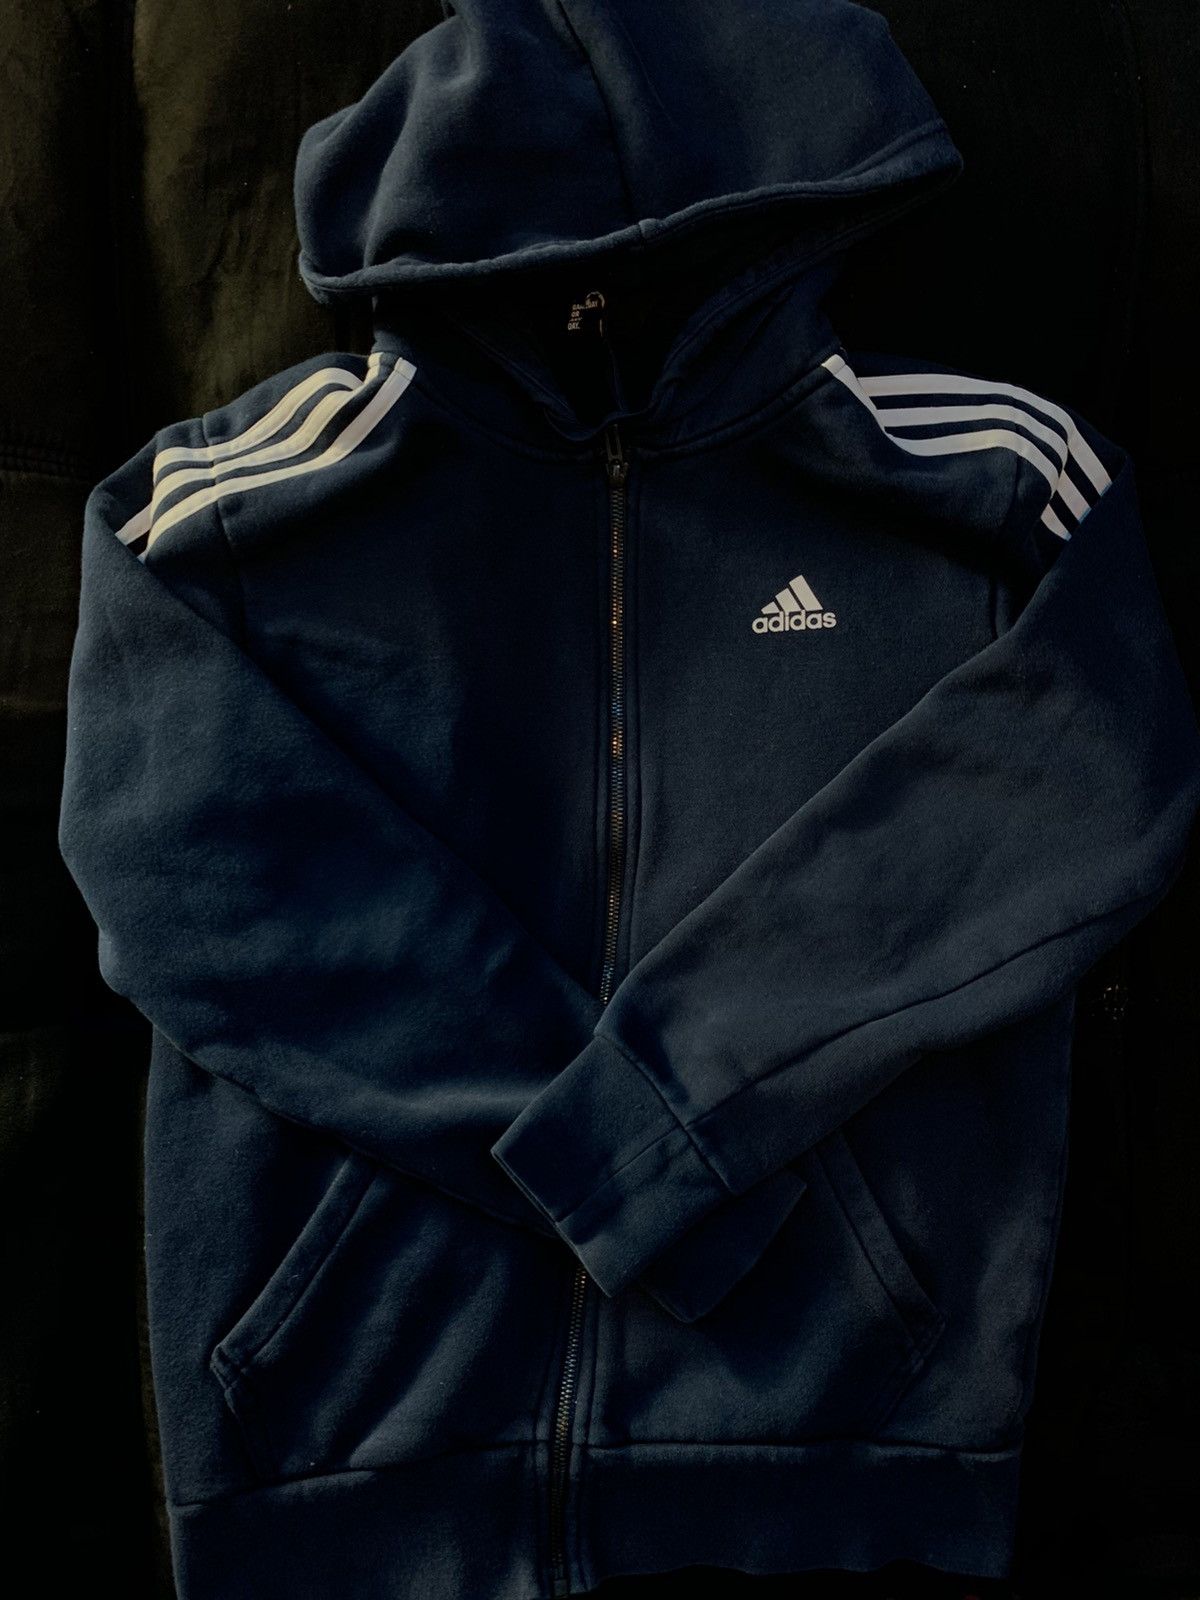 Adidas Adidas Navy Blue zip up hoodie Size US S / EU 44-46 / 1 - 1 Preview